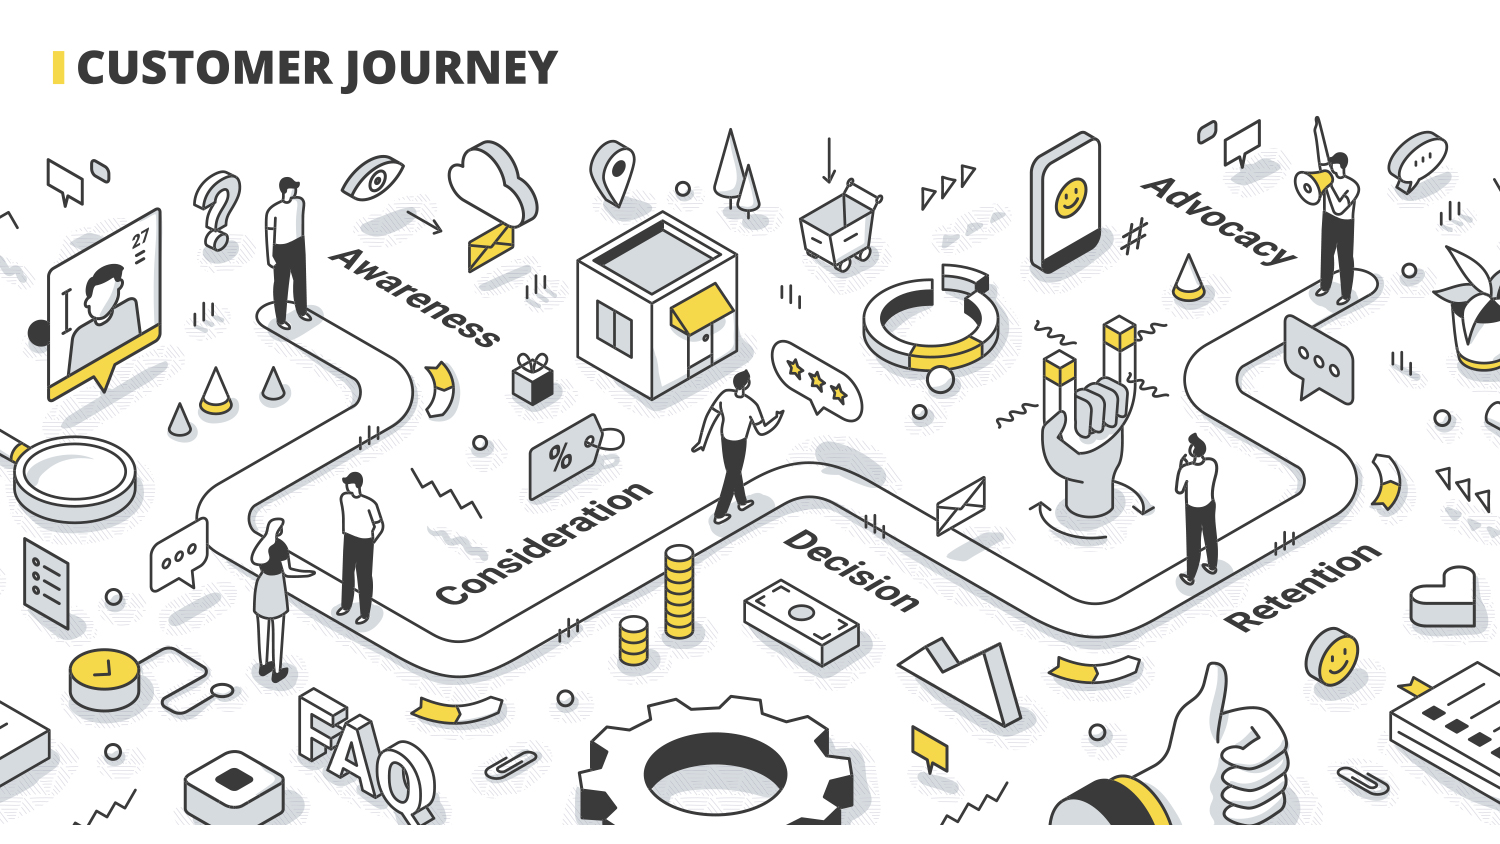 customer journey map para que sirve